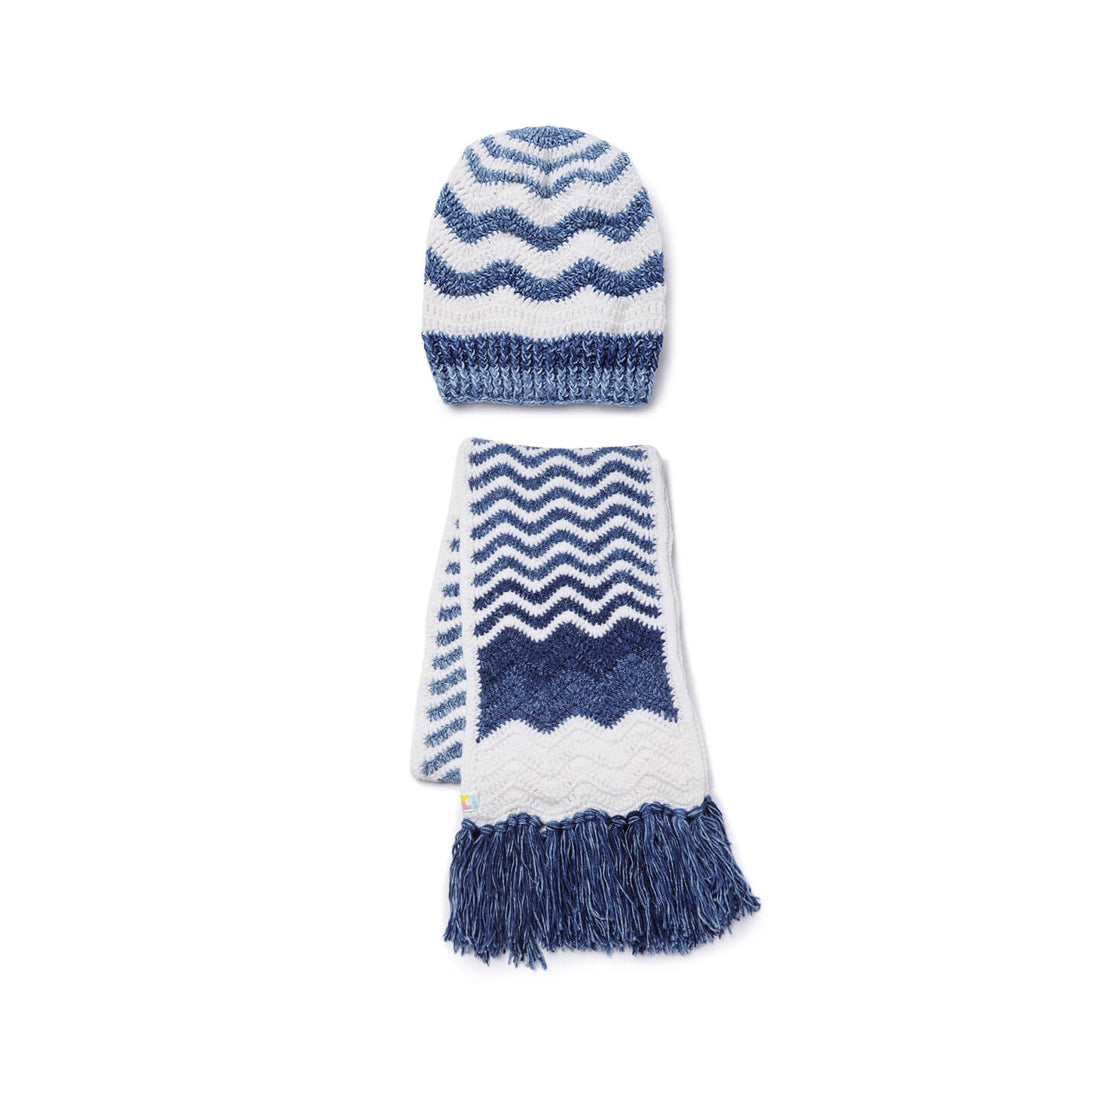 Beanie and Scarf Coordinating Set - 3199